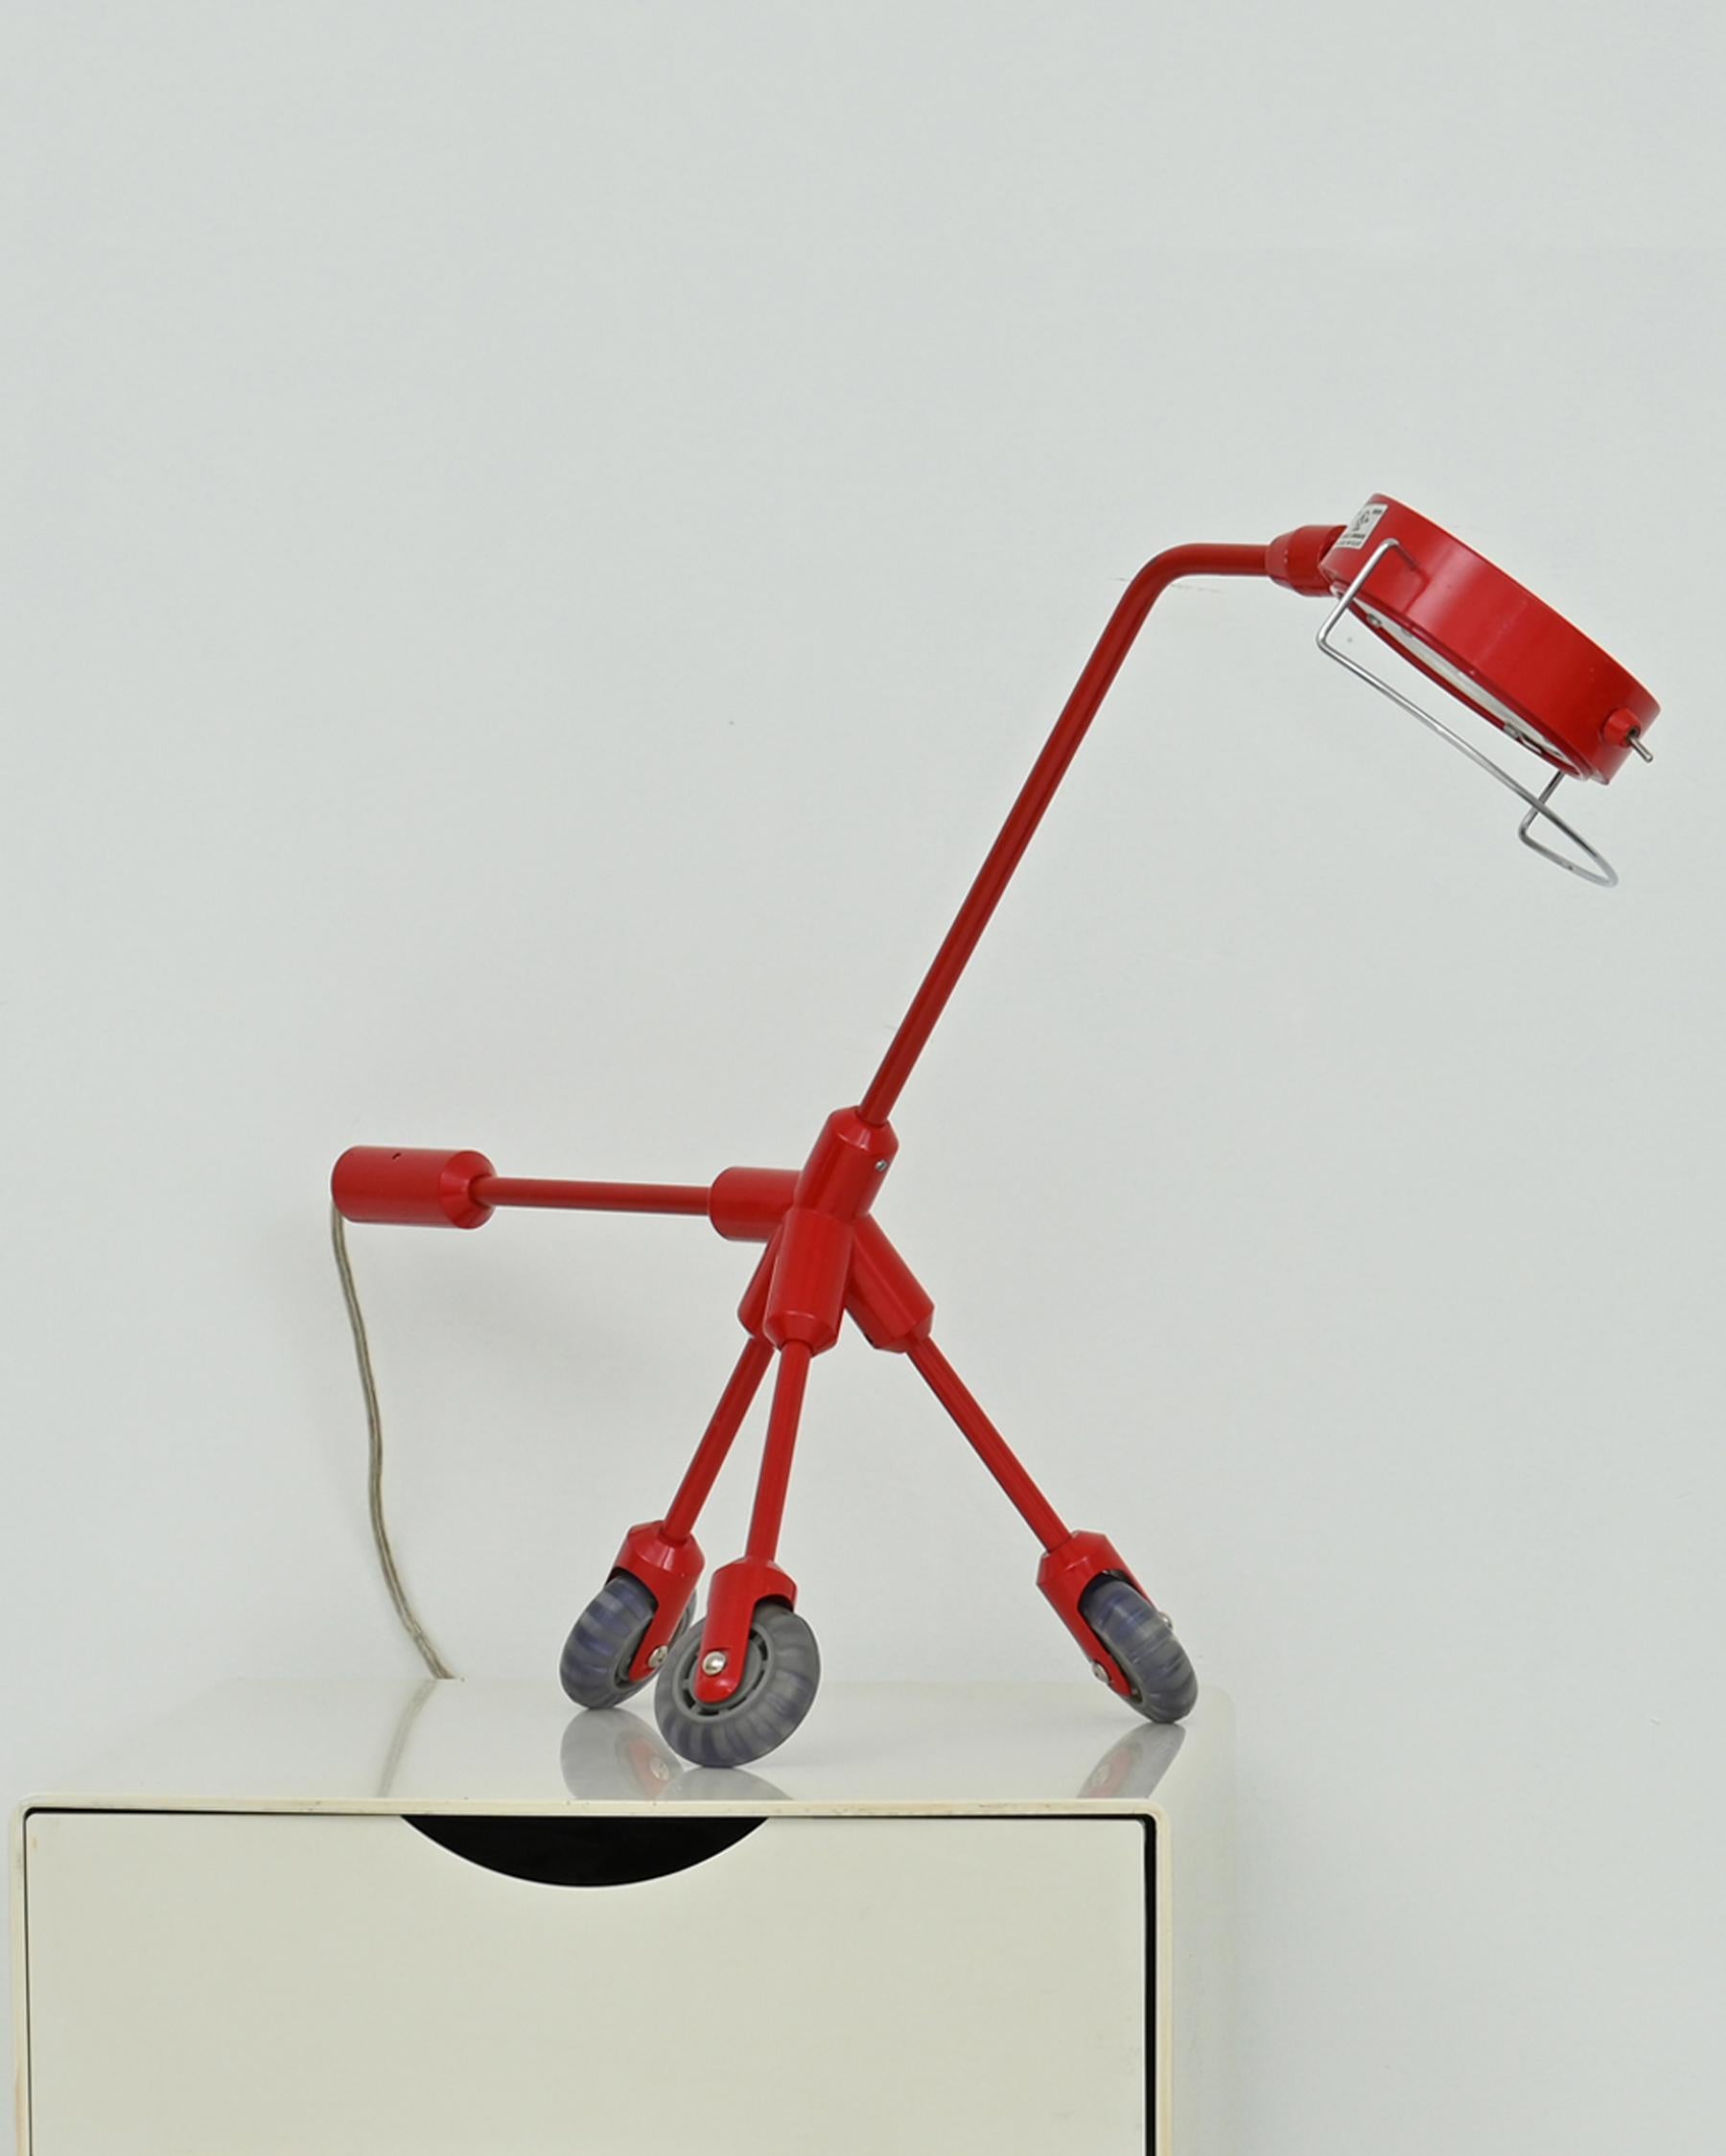 2000s Kila lamp designed by Harry Allen for IKEA. Playful lamp inspired by Harry’s longstanding interest in r. Harry said, the “Kila spins on its axis as if it had been practicing that move in the rink for years.” The lamp received an Honorable